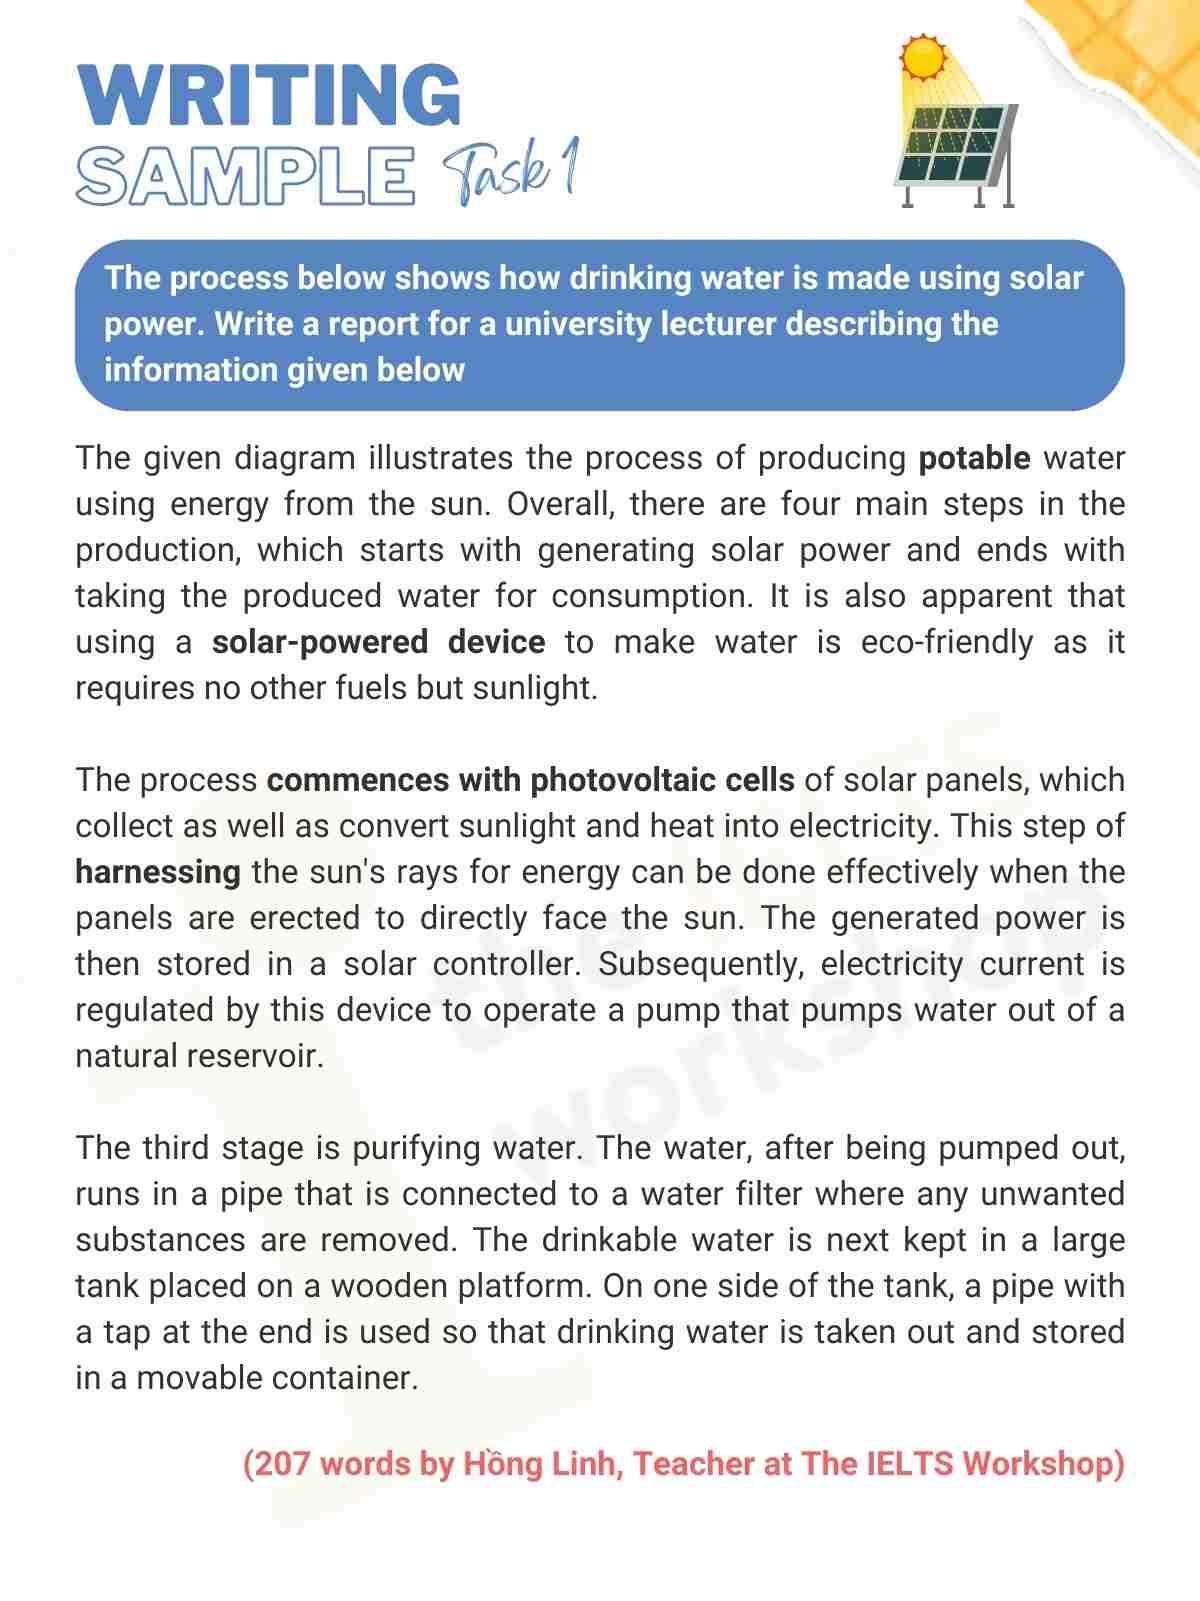 The-process-below-shows-how-drinking-water-is-made